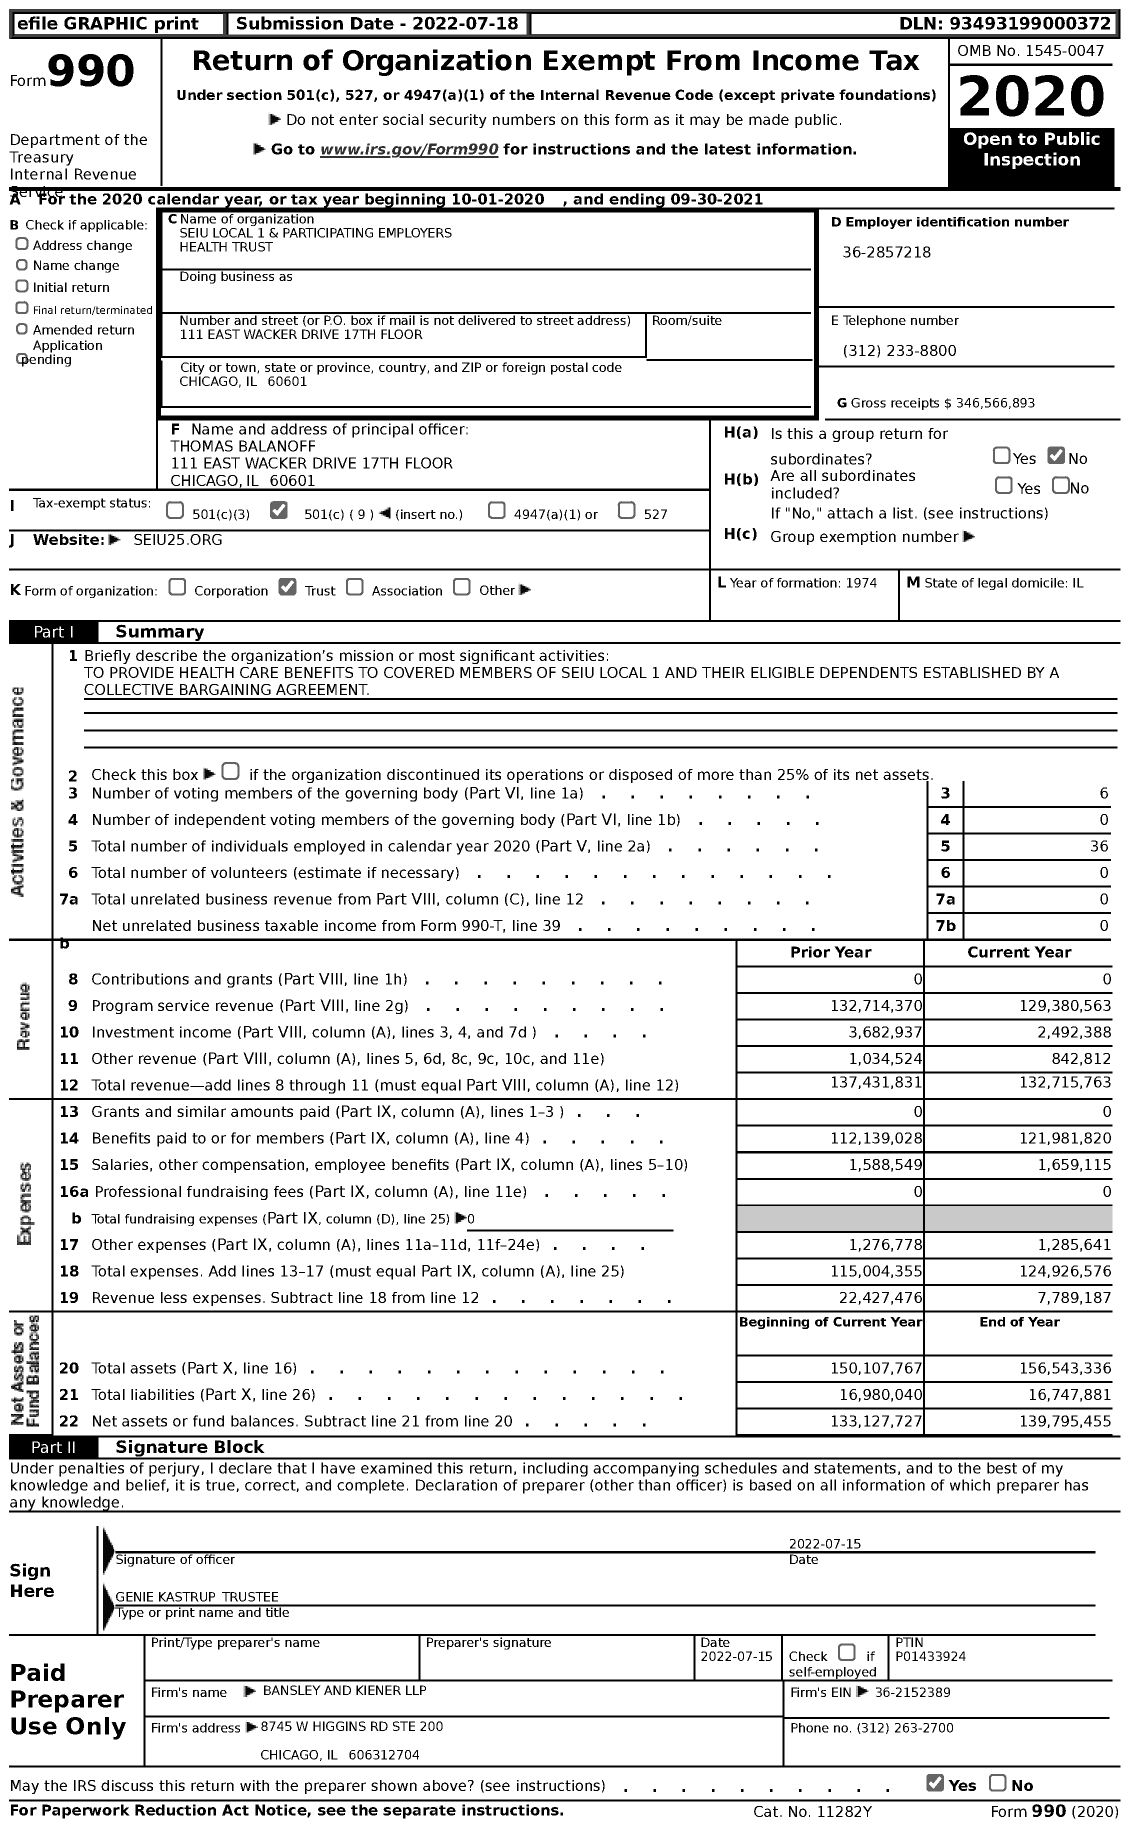 Image of first page of 2020 Form 990 for Seiu Local 1 and Participating Employers Health Trust